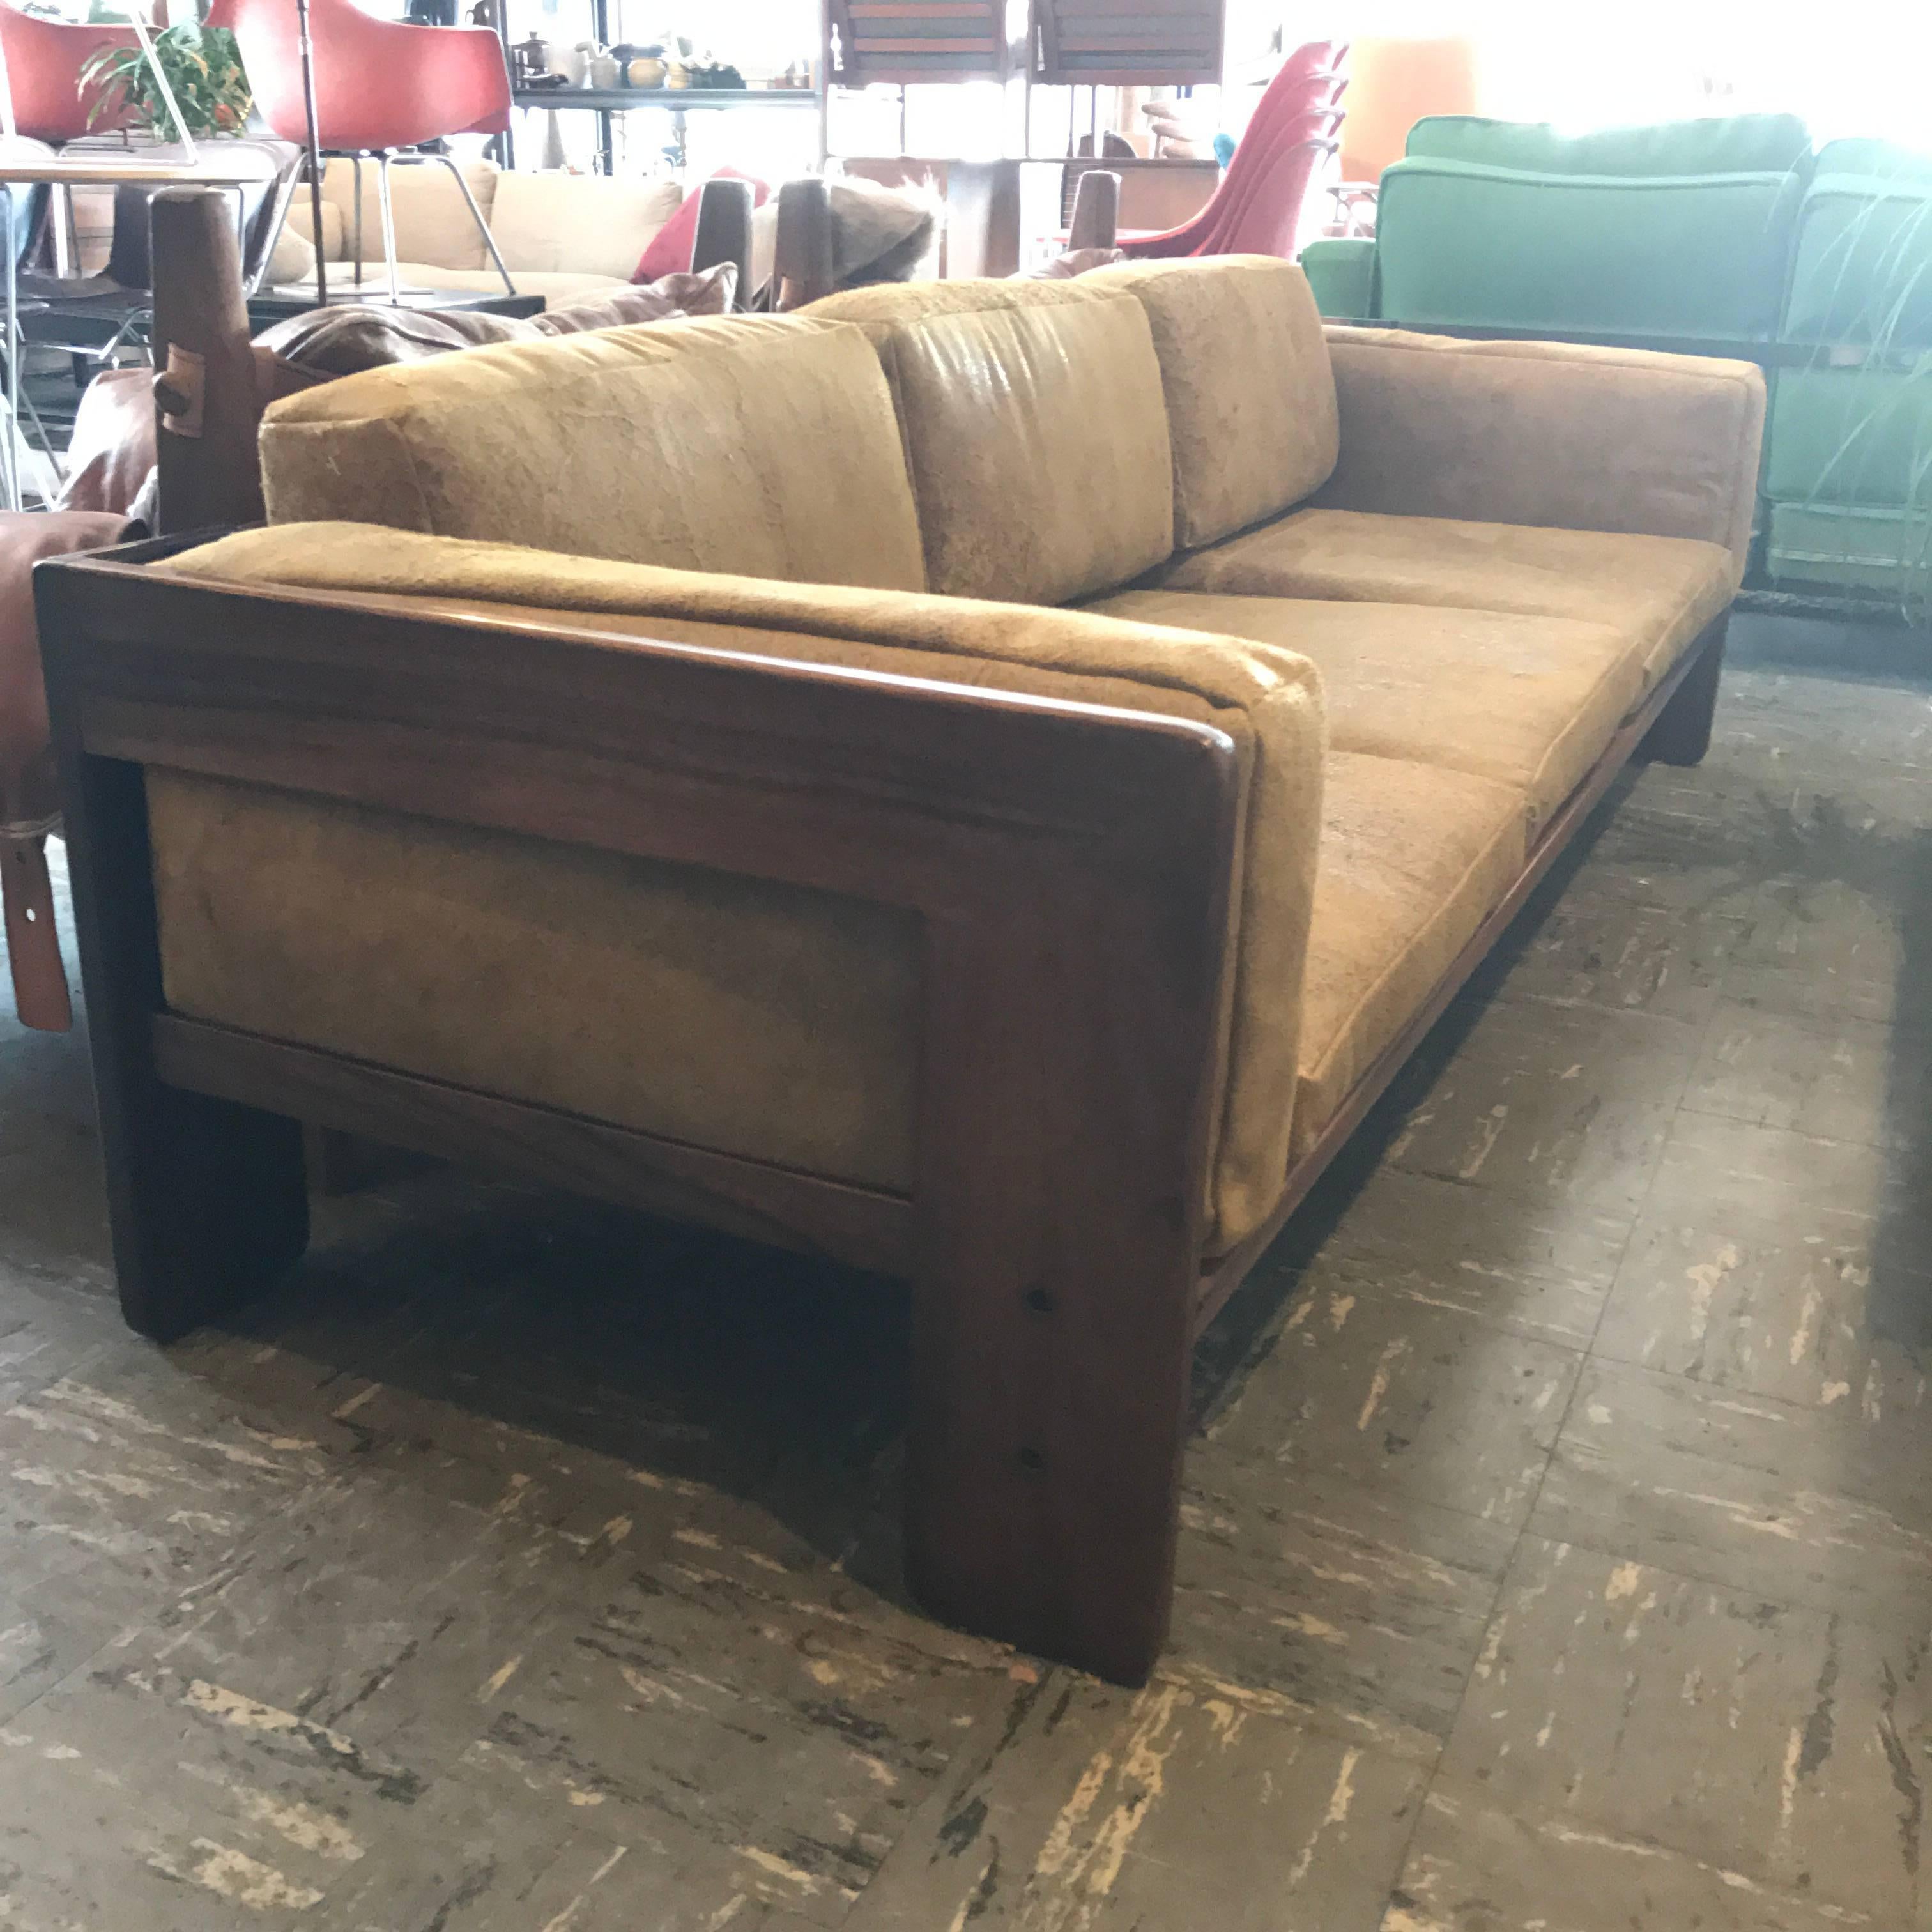 Tobia Scarpa Knoll Bastiano Rosewood Sofa Vintage Leather Cushions In Excellent Condition In Salt Lake City, UT